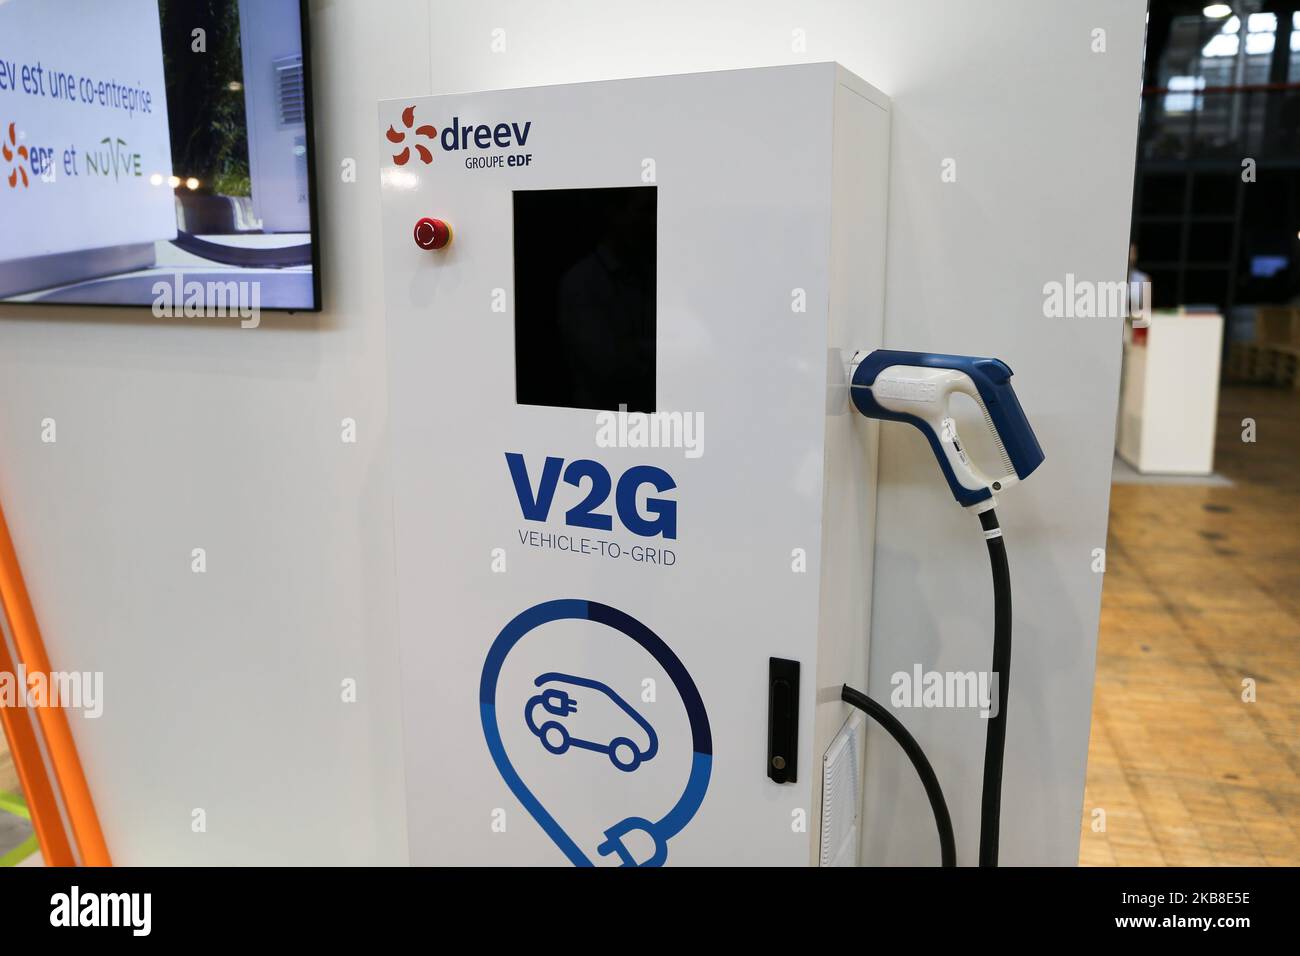 The French company EDF exhibits a charging terminal Dreev V2G for electric vehicles at the Autonomy and Urban Mobility show, in Paris on October 16, 2019. (Photo by Michel Stoupak/NurPhoto) Stock Photo